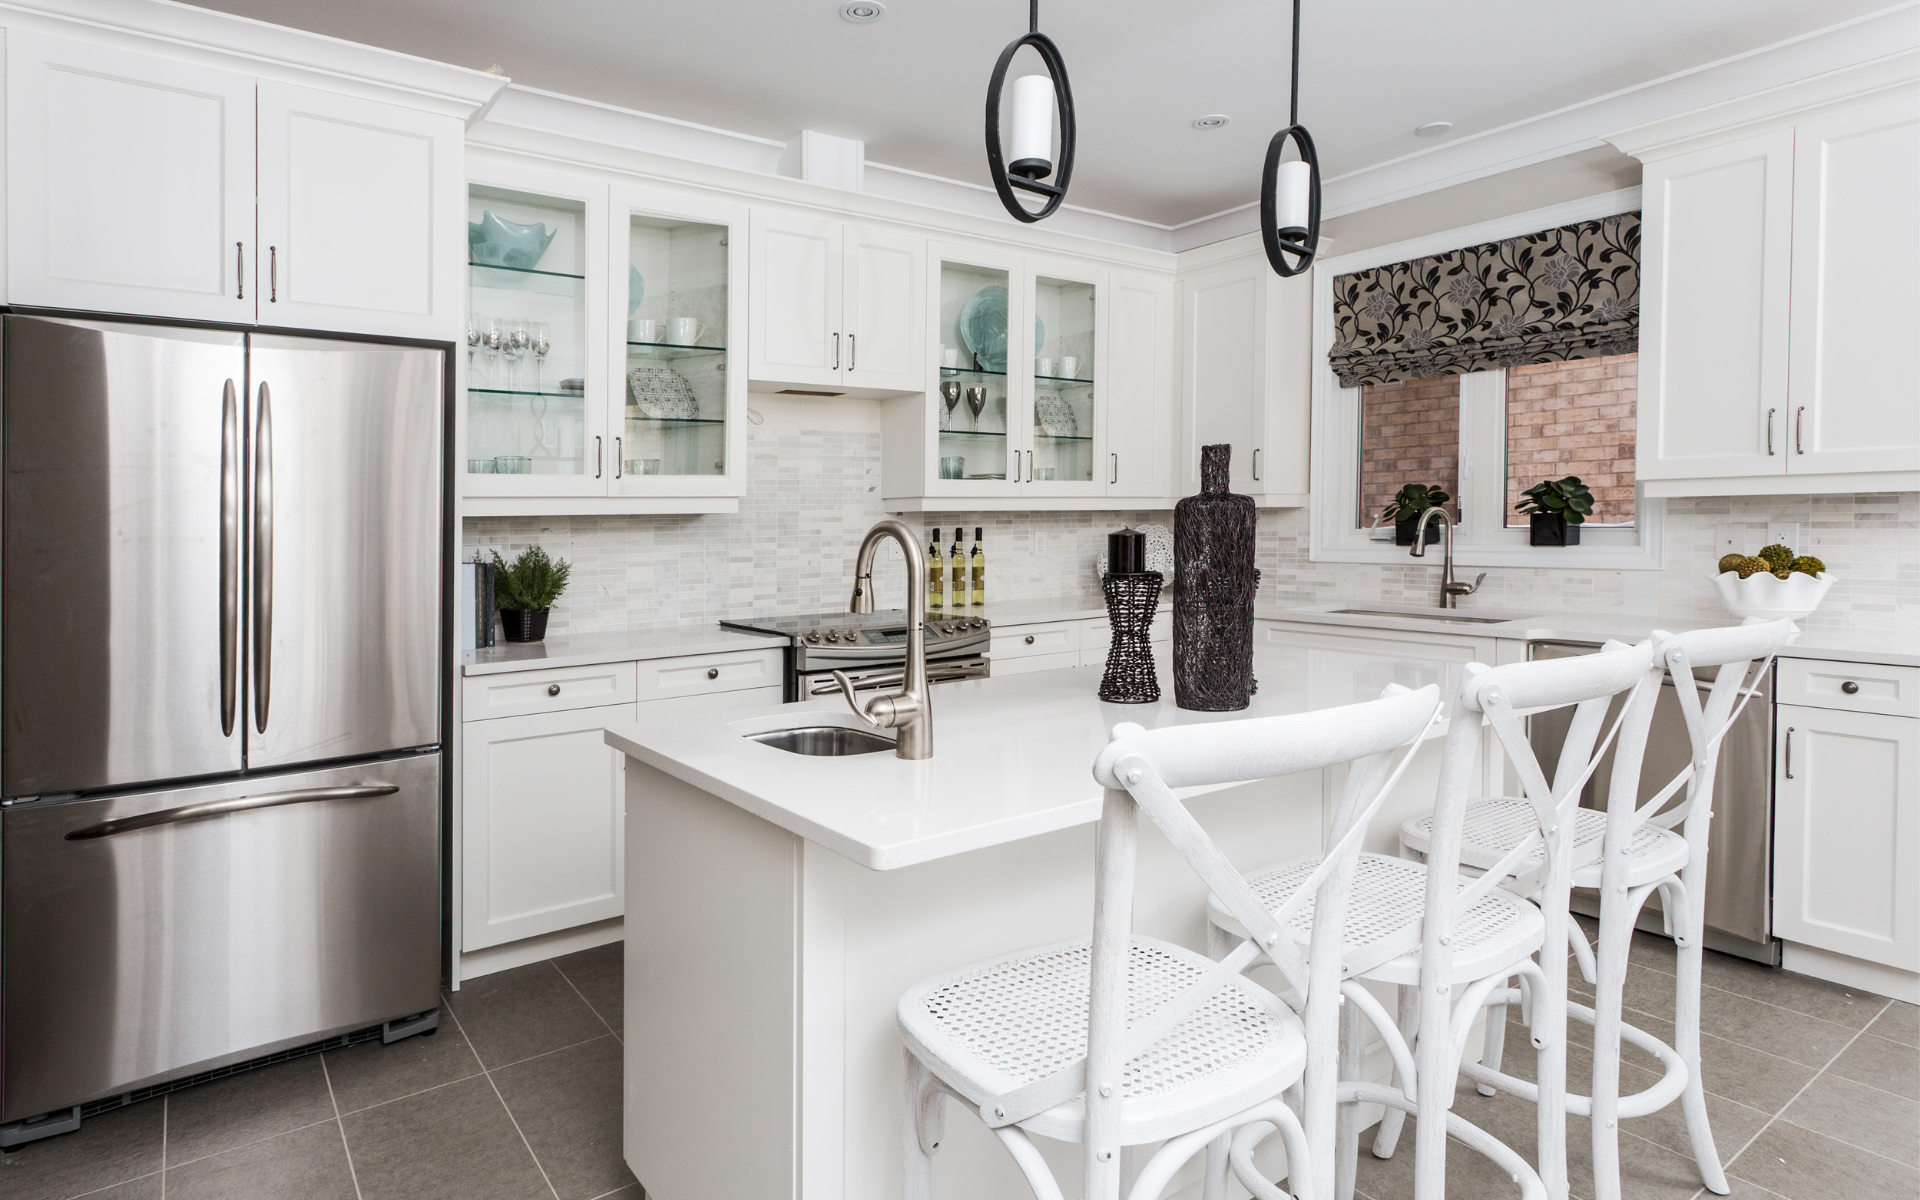 Elegant white kitchen with white cabinets and countertops